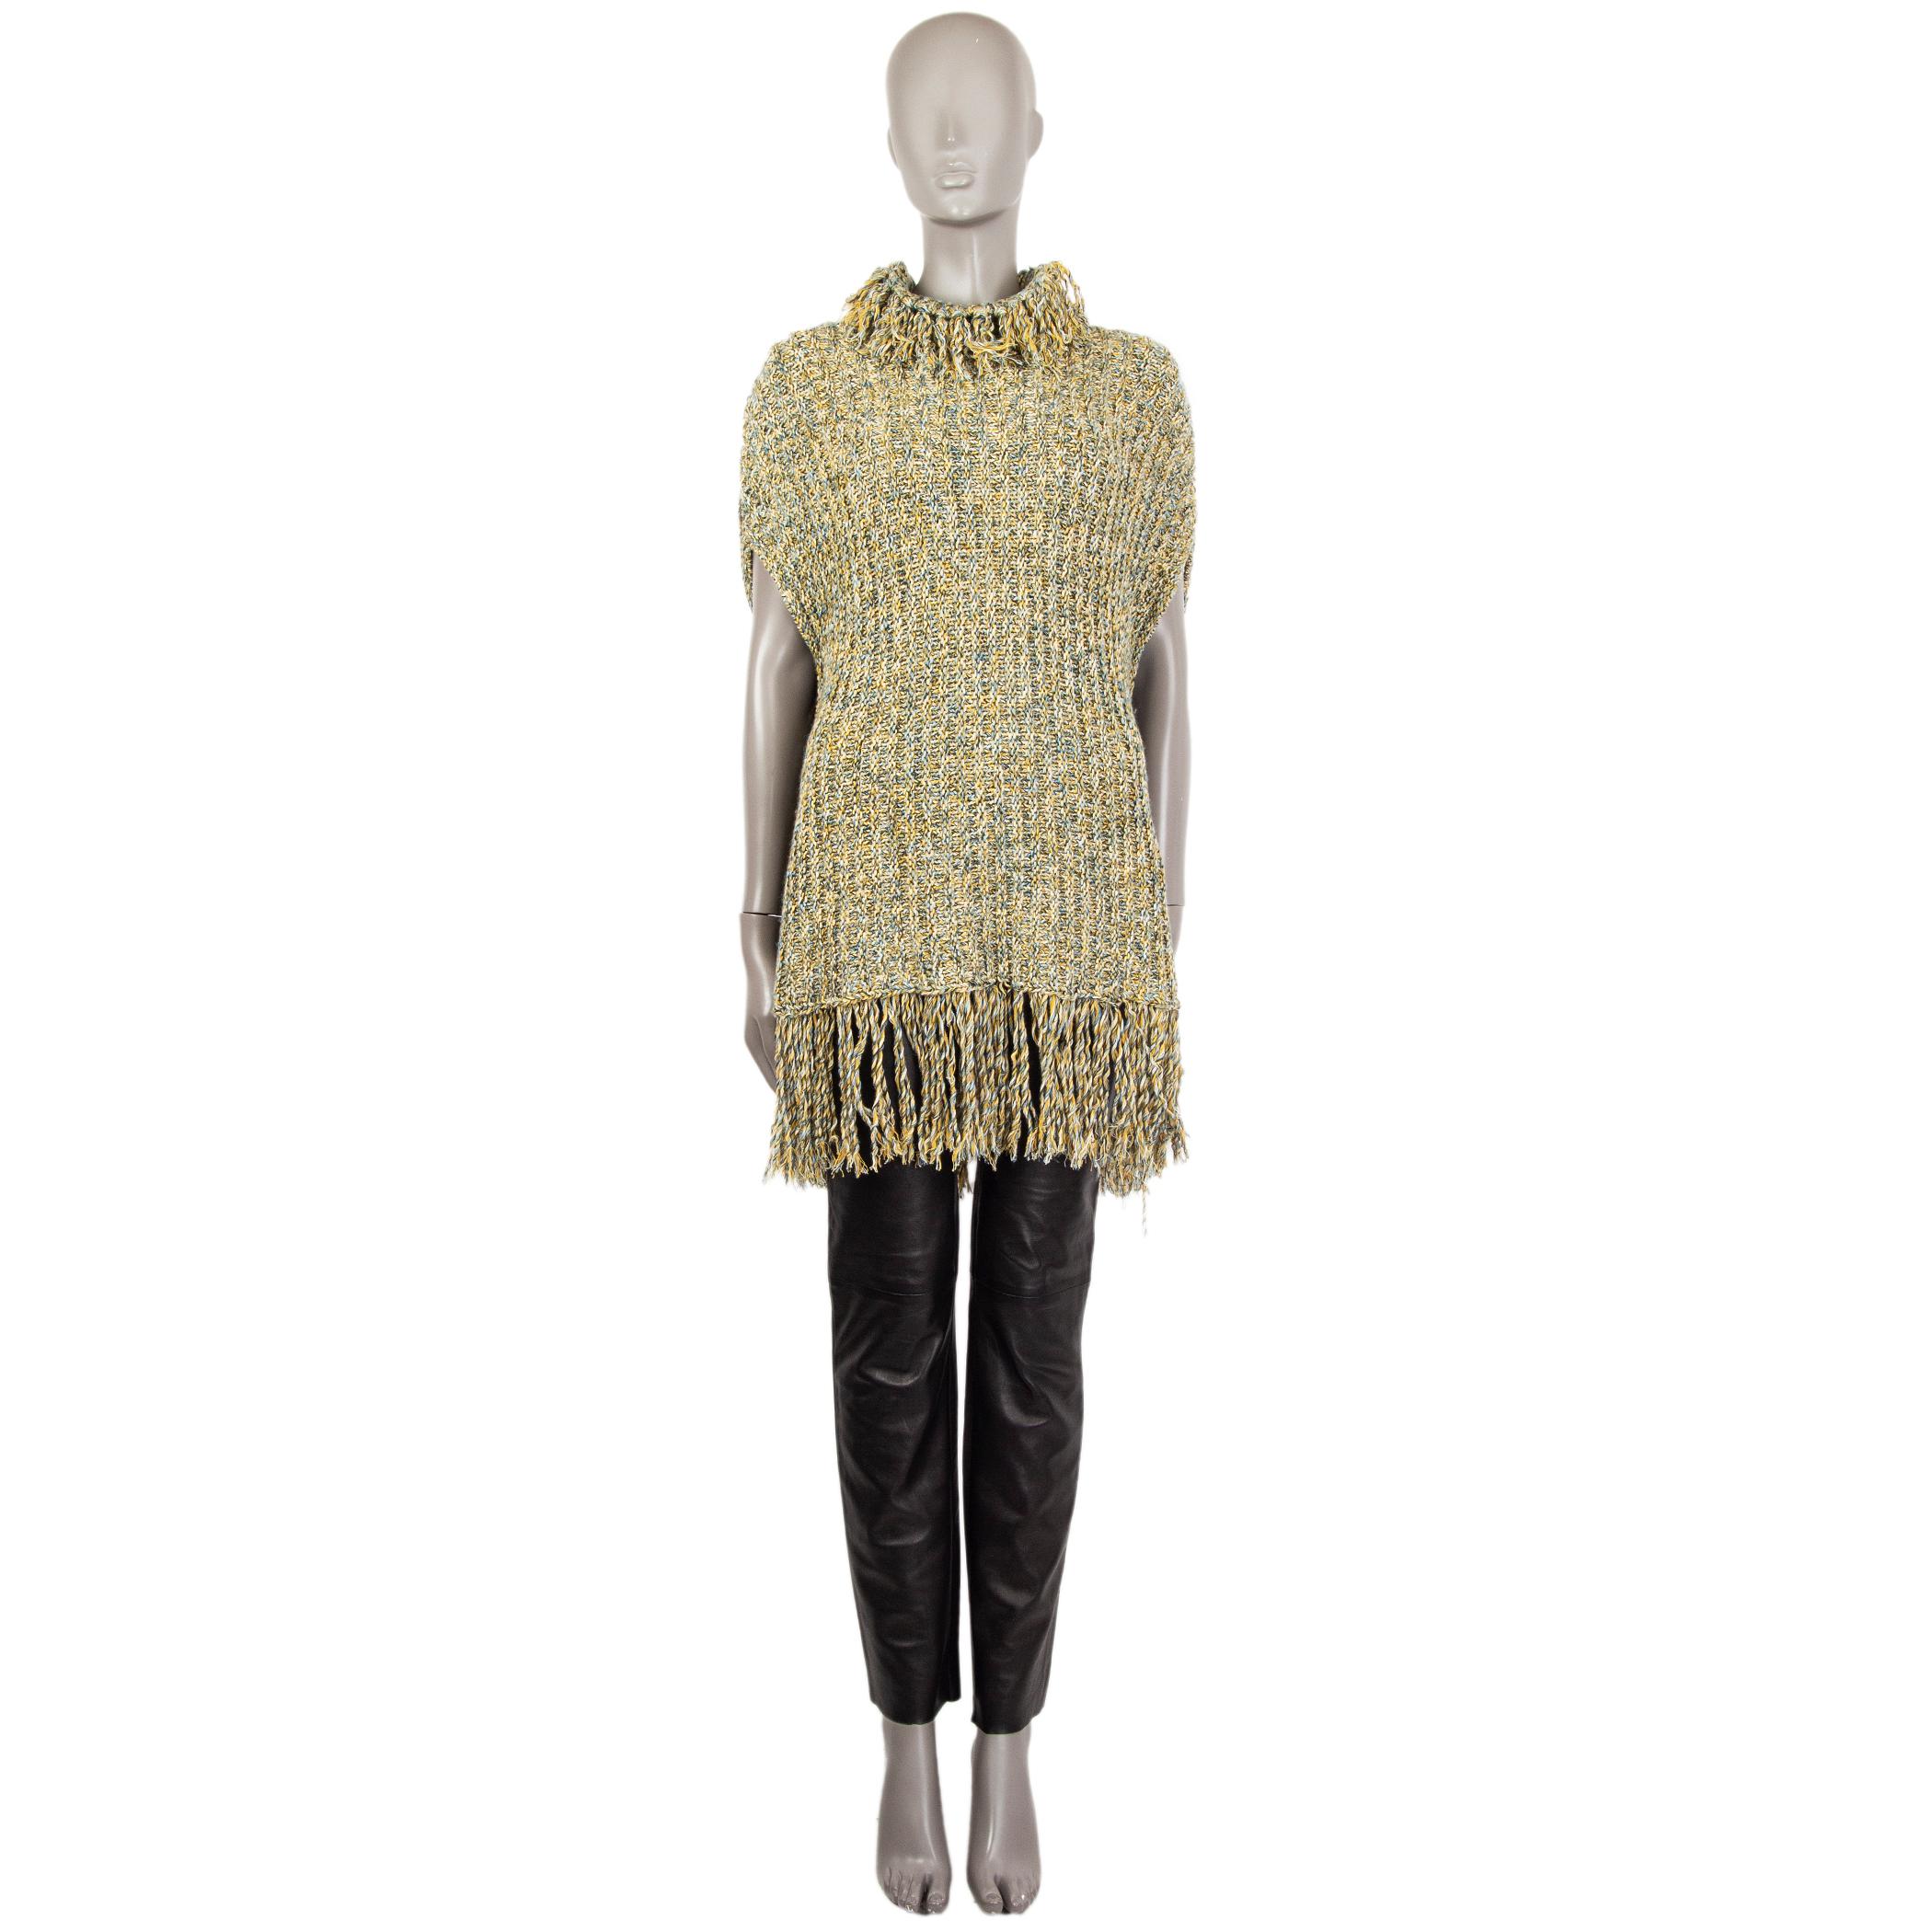 Valentino mock-neck sleeveless braid-knit sweater in light blue, yellos, sage, and black cotton (57%) and virgin wool (43). With fringed neck and hemline. Has been worn and is in excellent condition. 

Tag Size M
Size M
Bust 106cm (41.3in) to 160cm